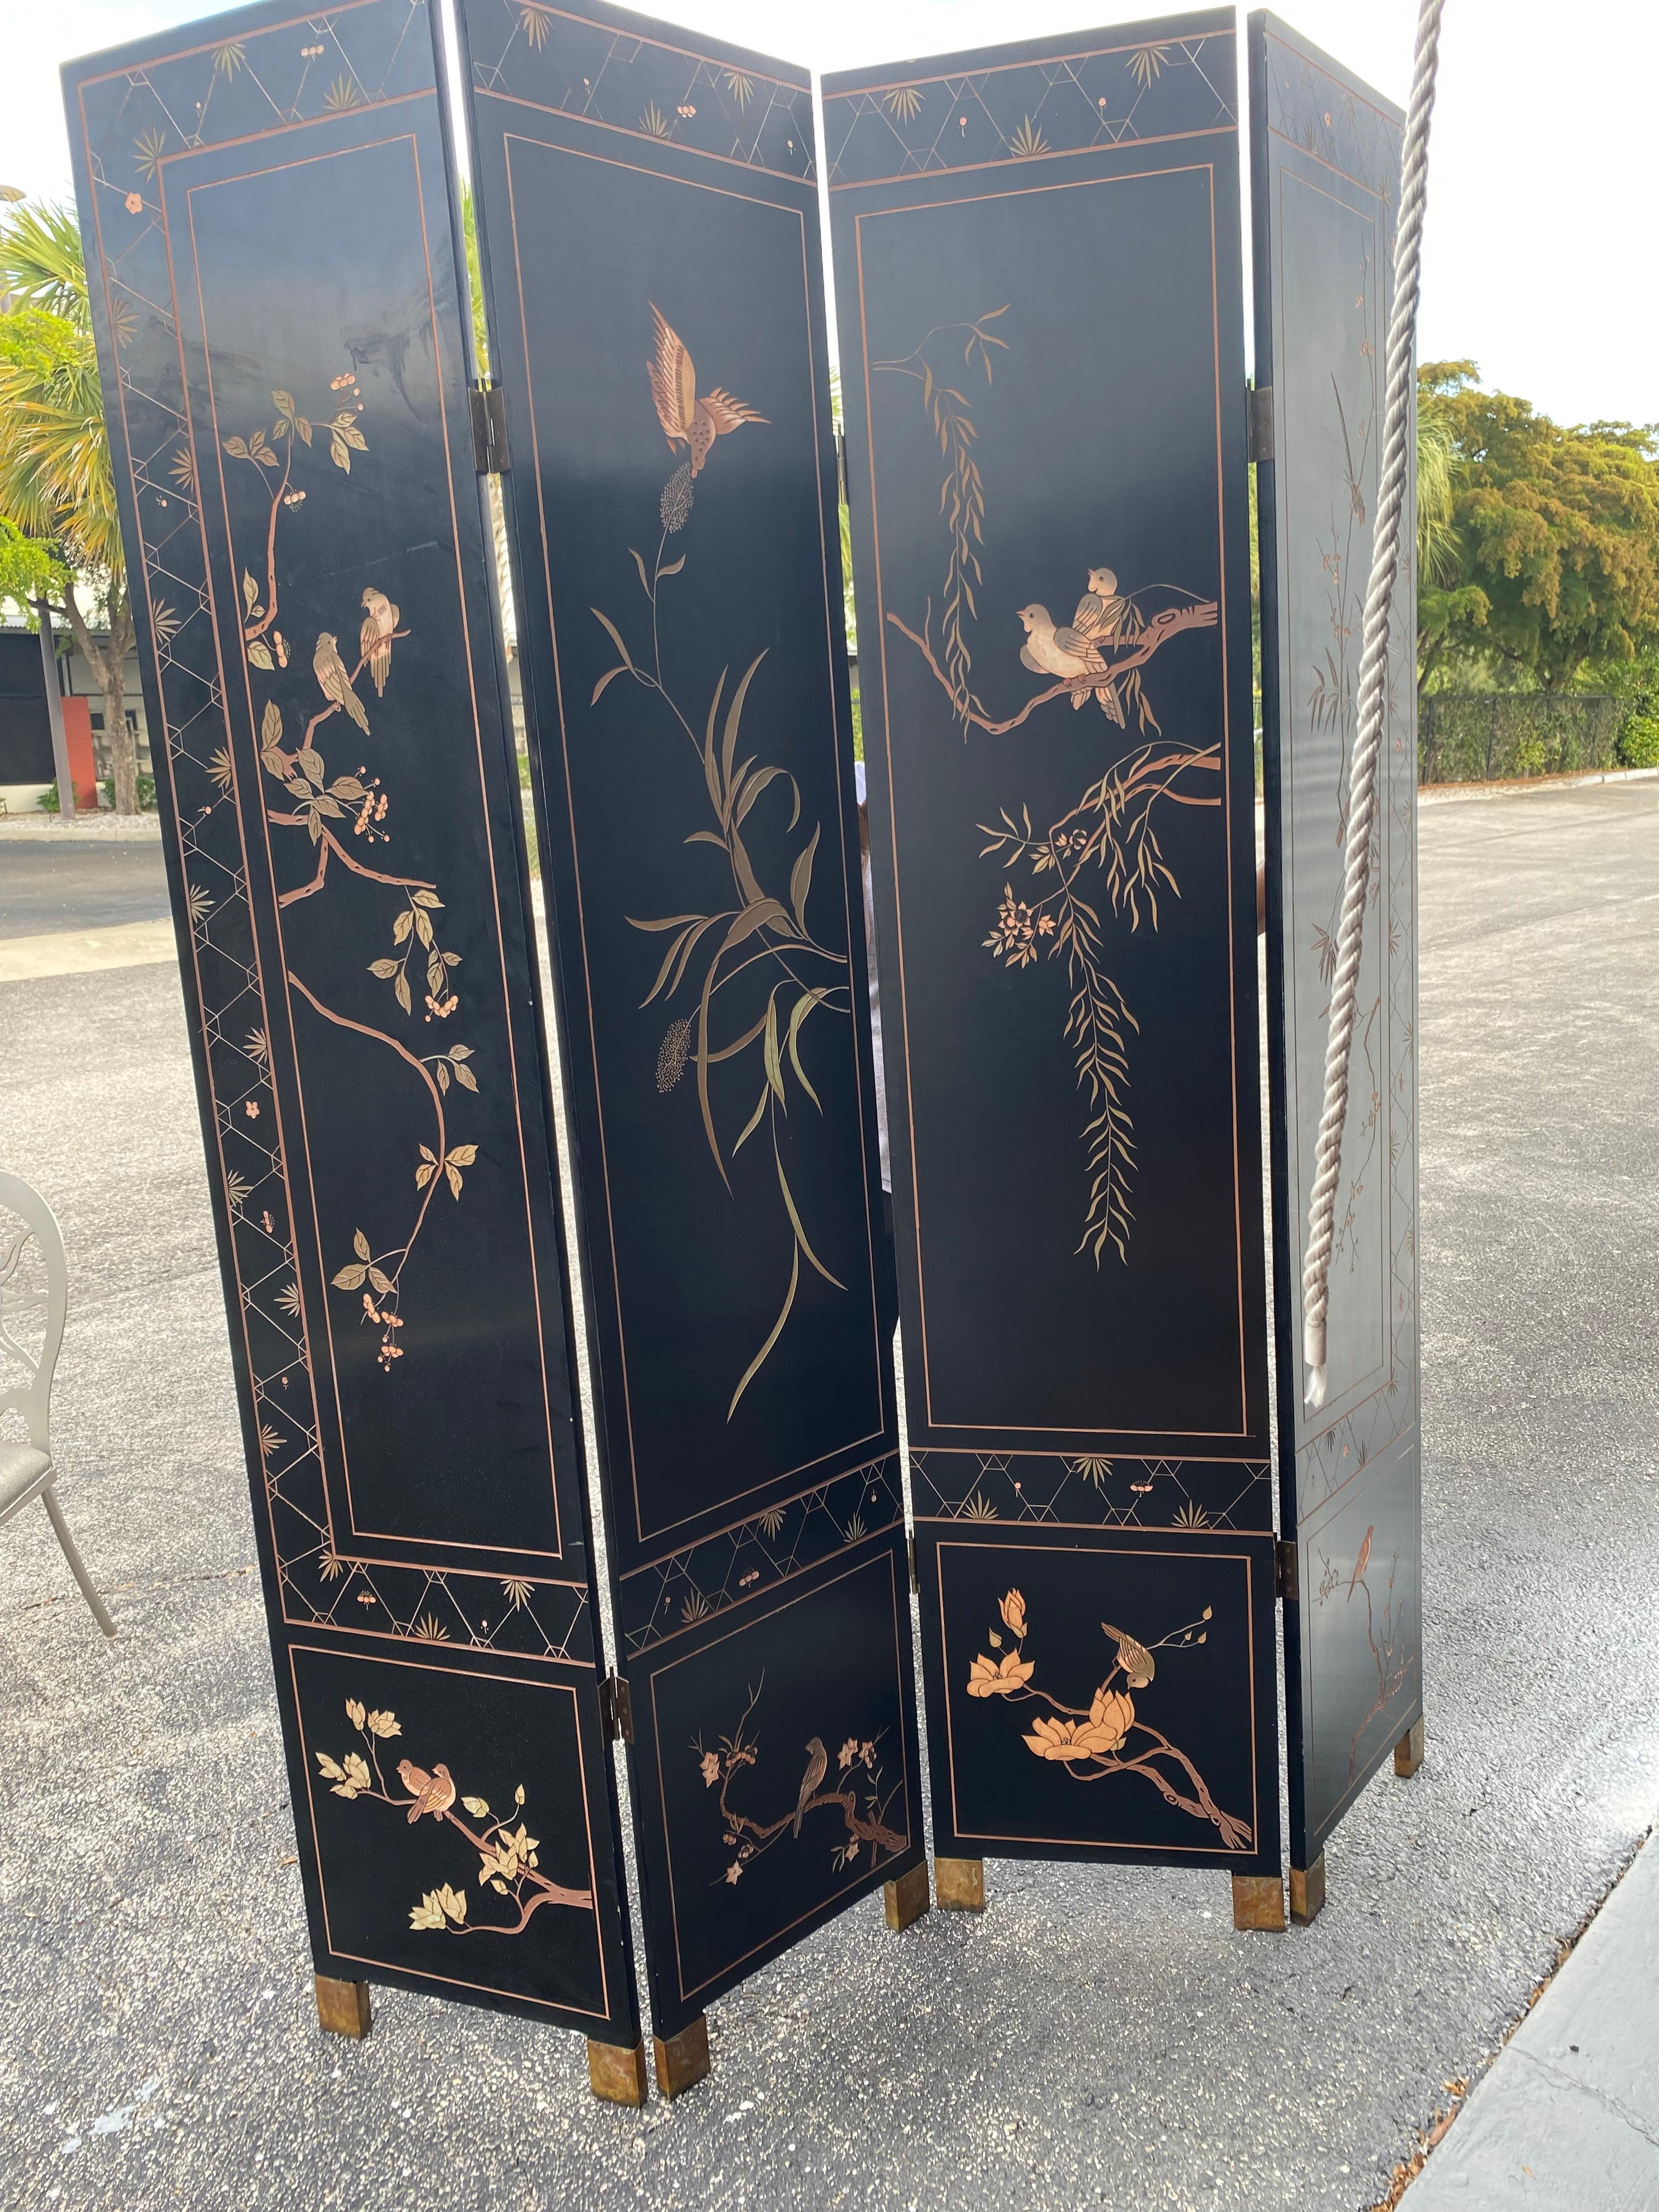 This four panel Coromandel Screen is a pleasure to look at having been hand crafted and edged painted and gold leaf with a center design showing off the gold leaf and flowers, etc. surrounding the design.